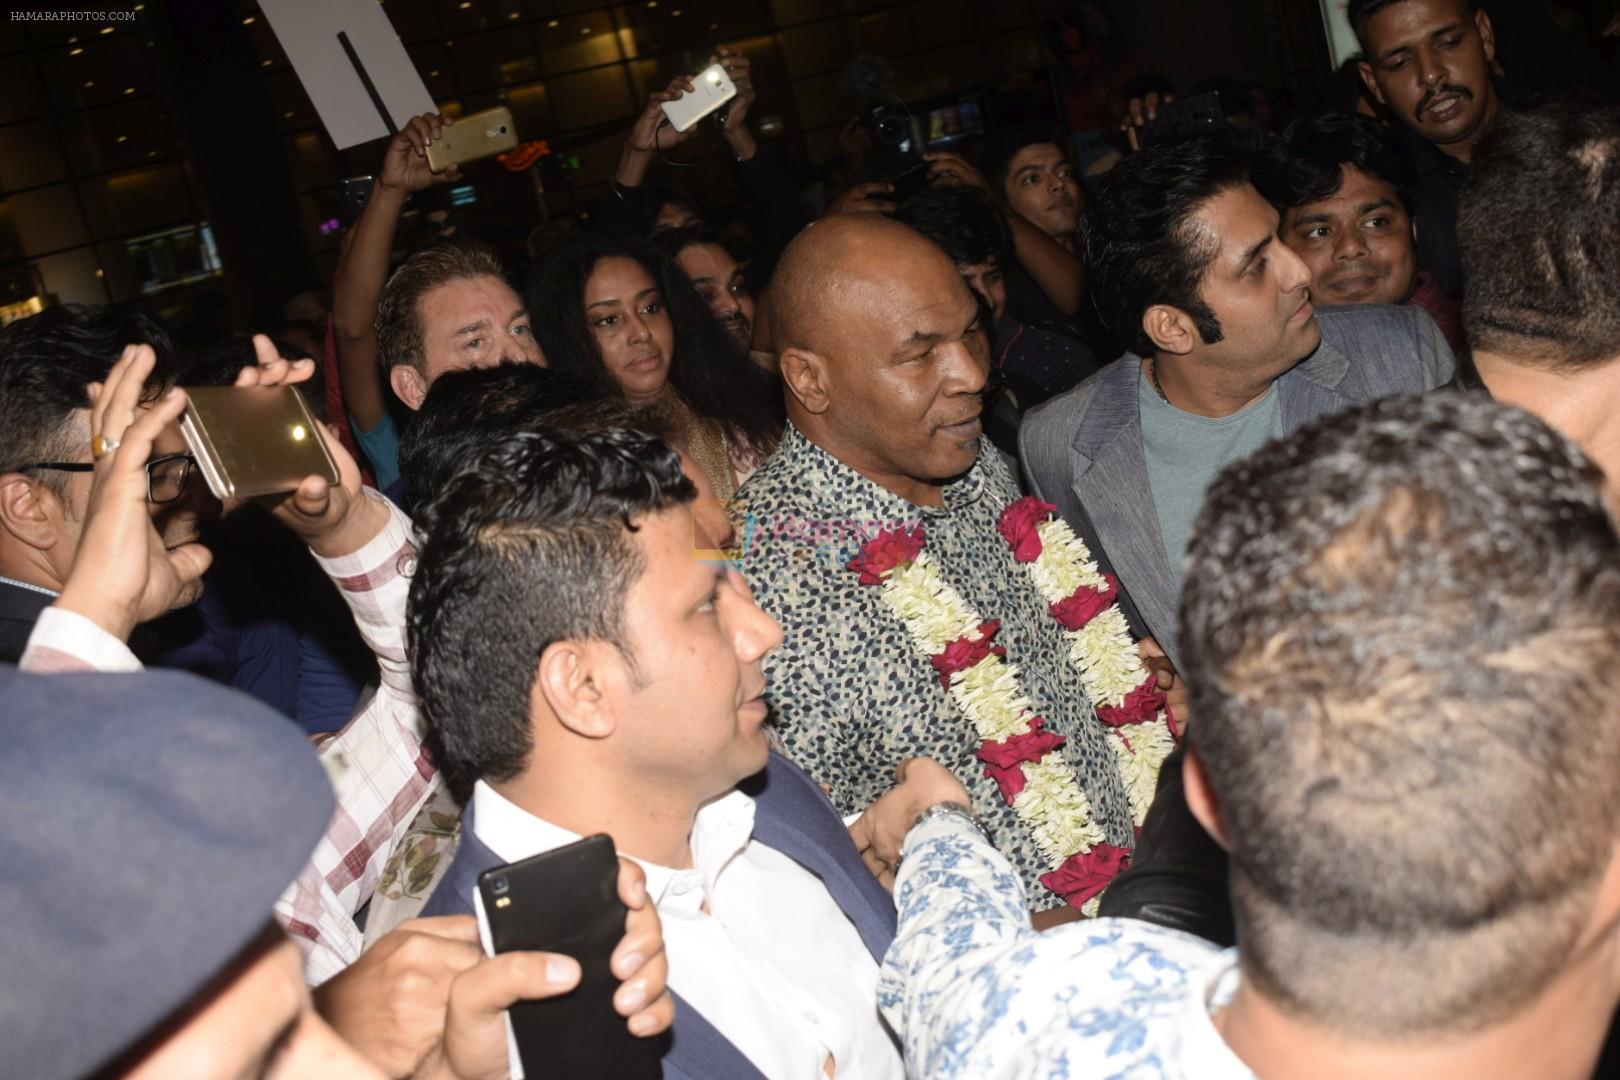 Mike Tyson arrive in Mumbai Airport on 27th Sept 2018